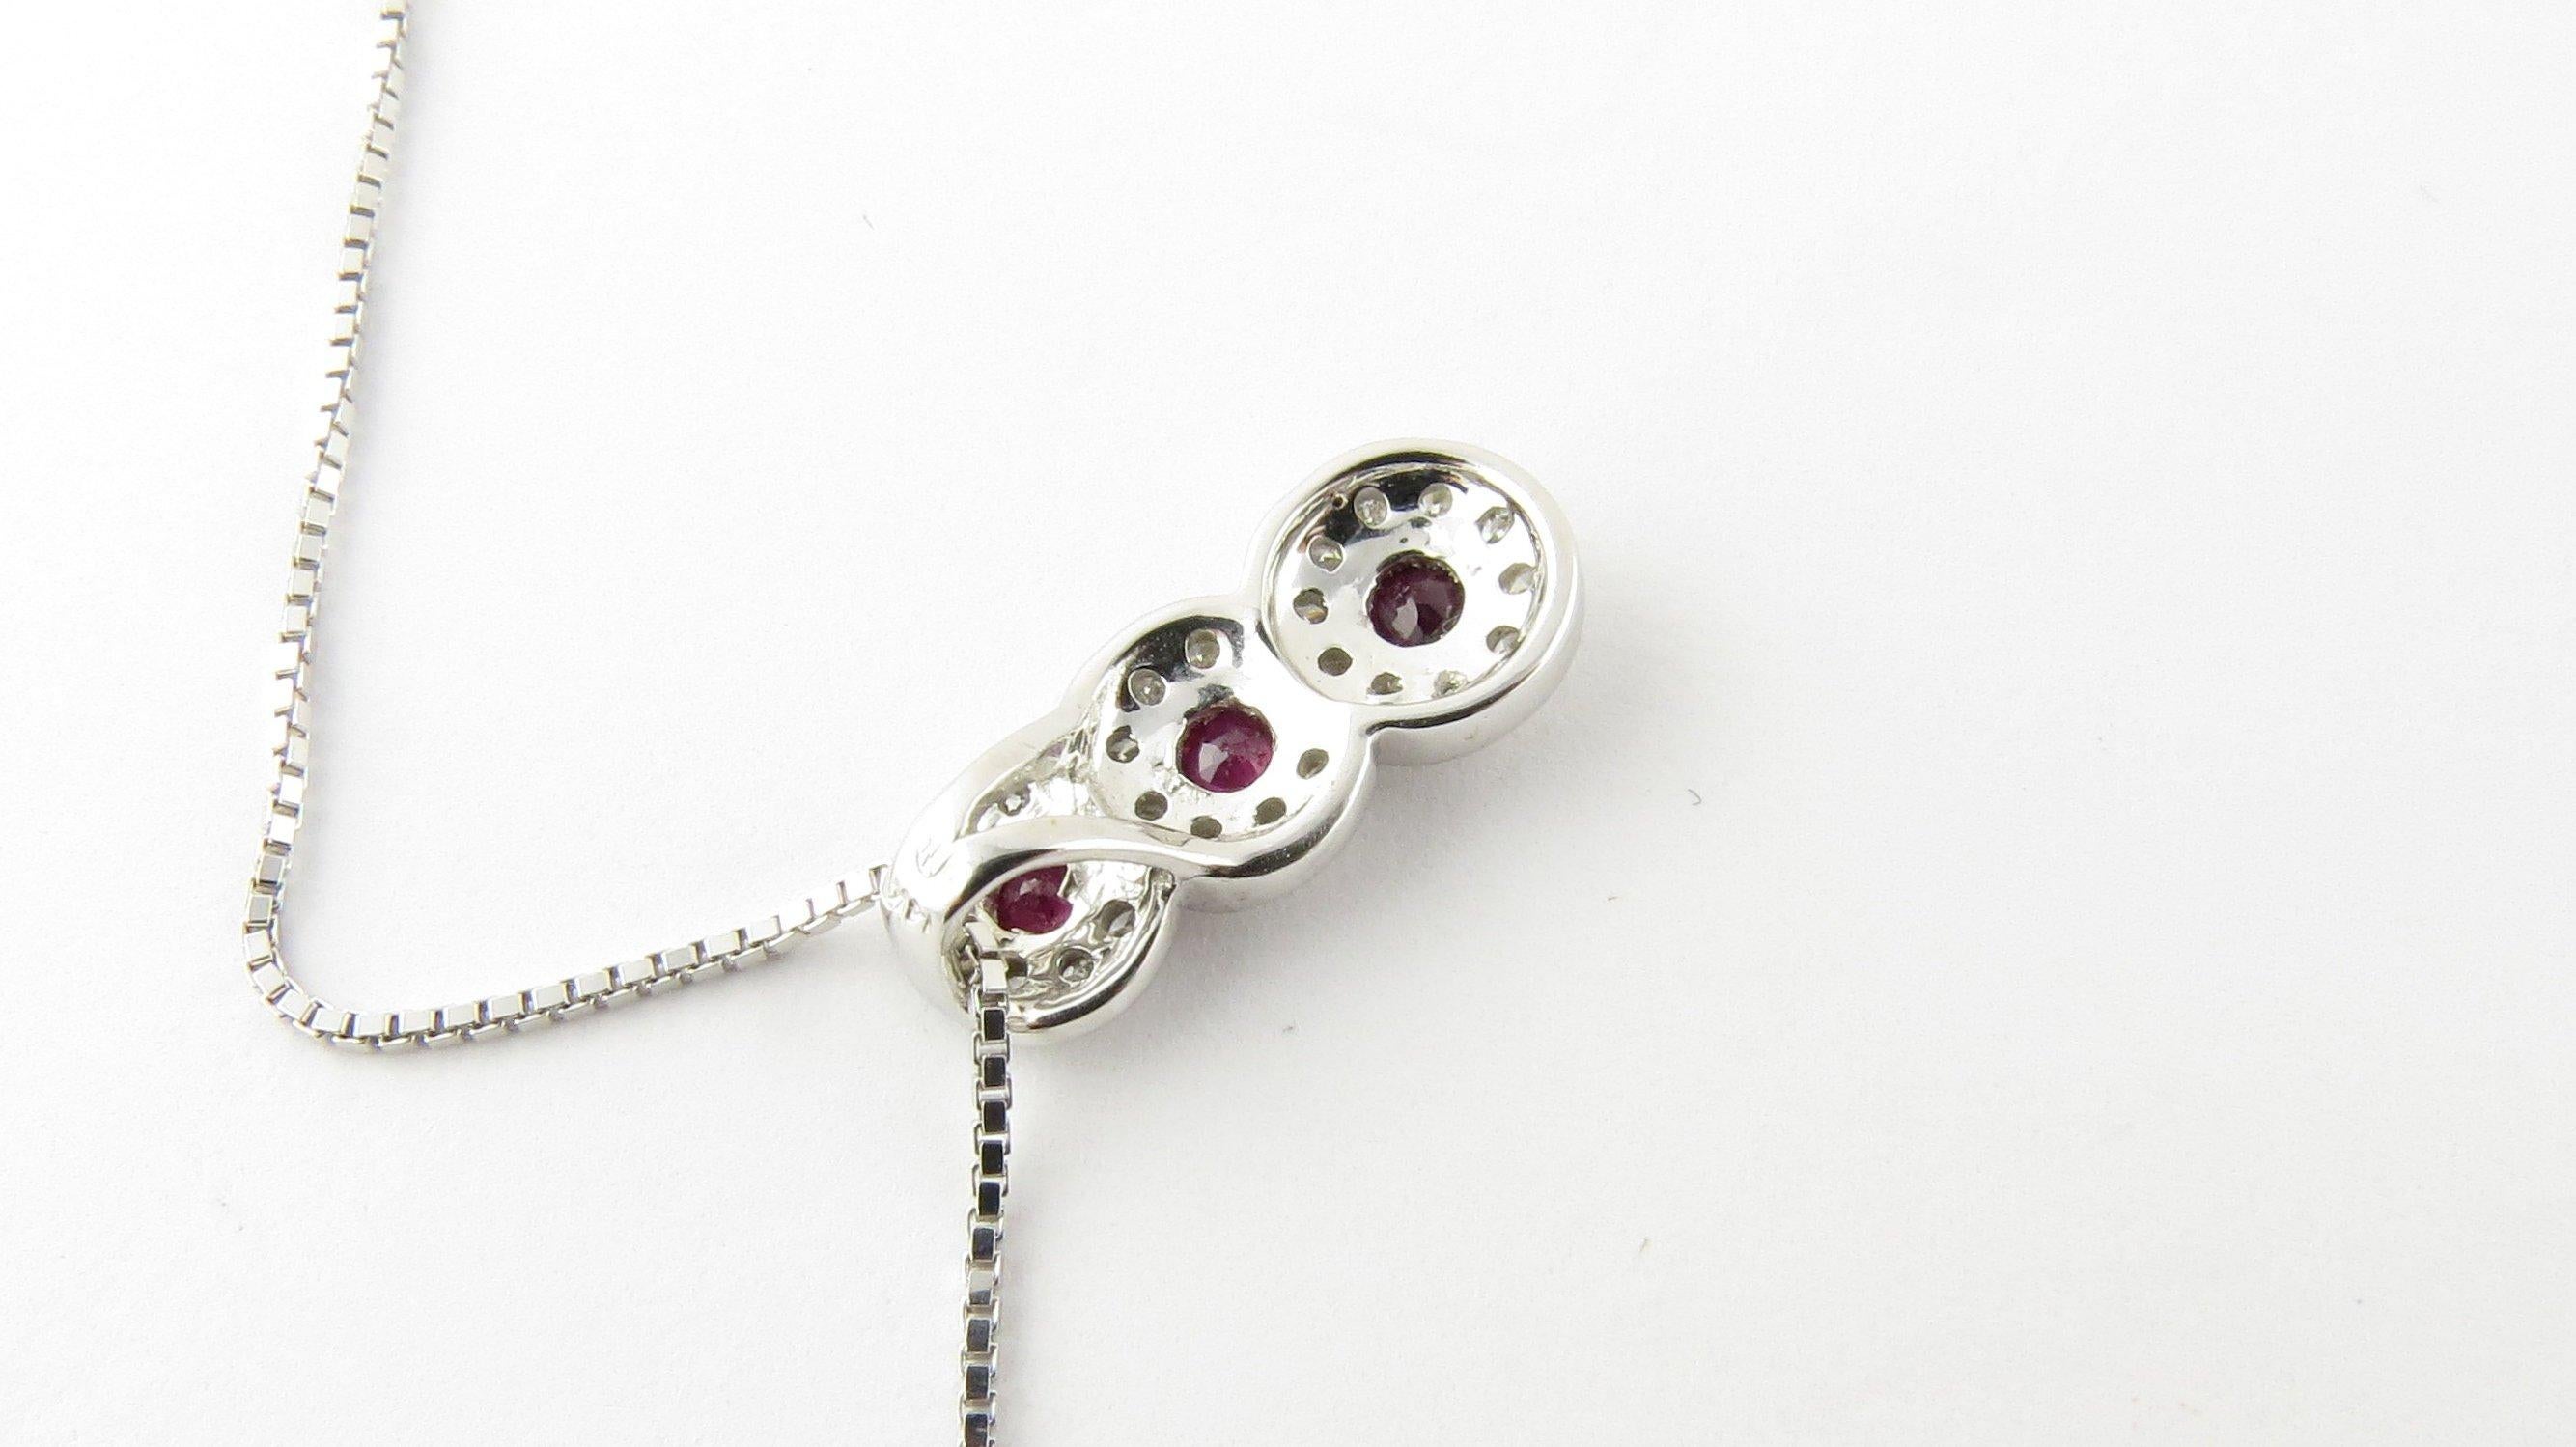 Vintage 14 Karat White Gold Genuine Ruby and Diamond Pendant Necklace- This lovely pendant features three round genuine rubies (3 mm each) surrounded by 24 round brilliant cut diamonds suspended from a classic 18